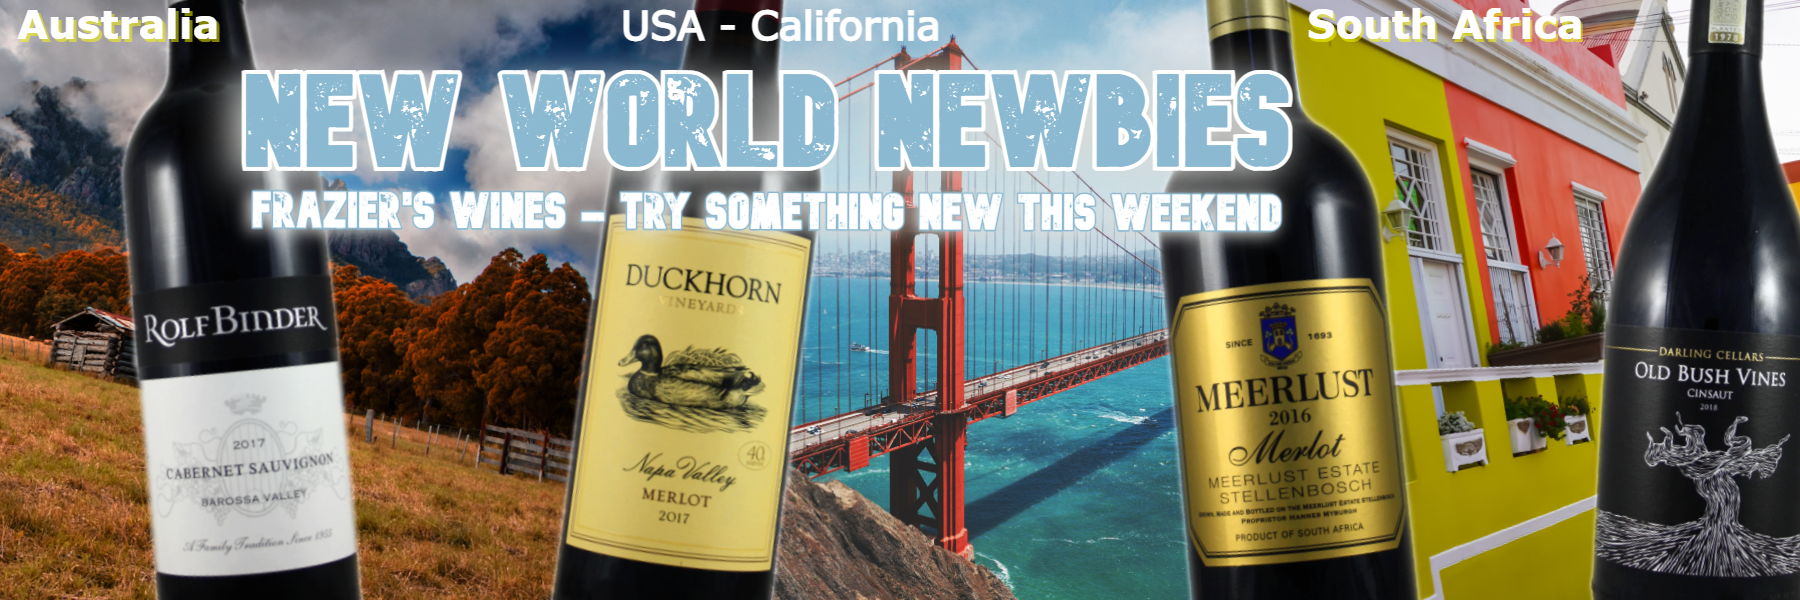 Wines - New World "Newbies" from Australia, California & South Africa